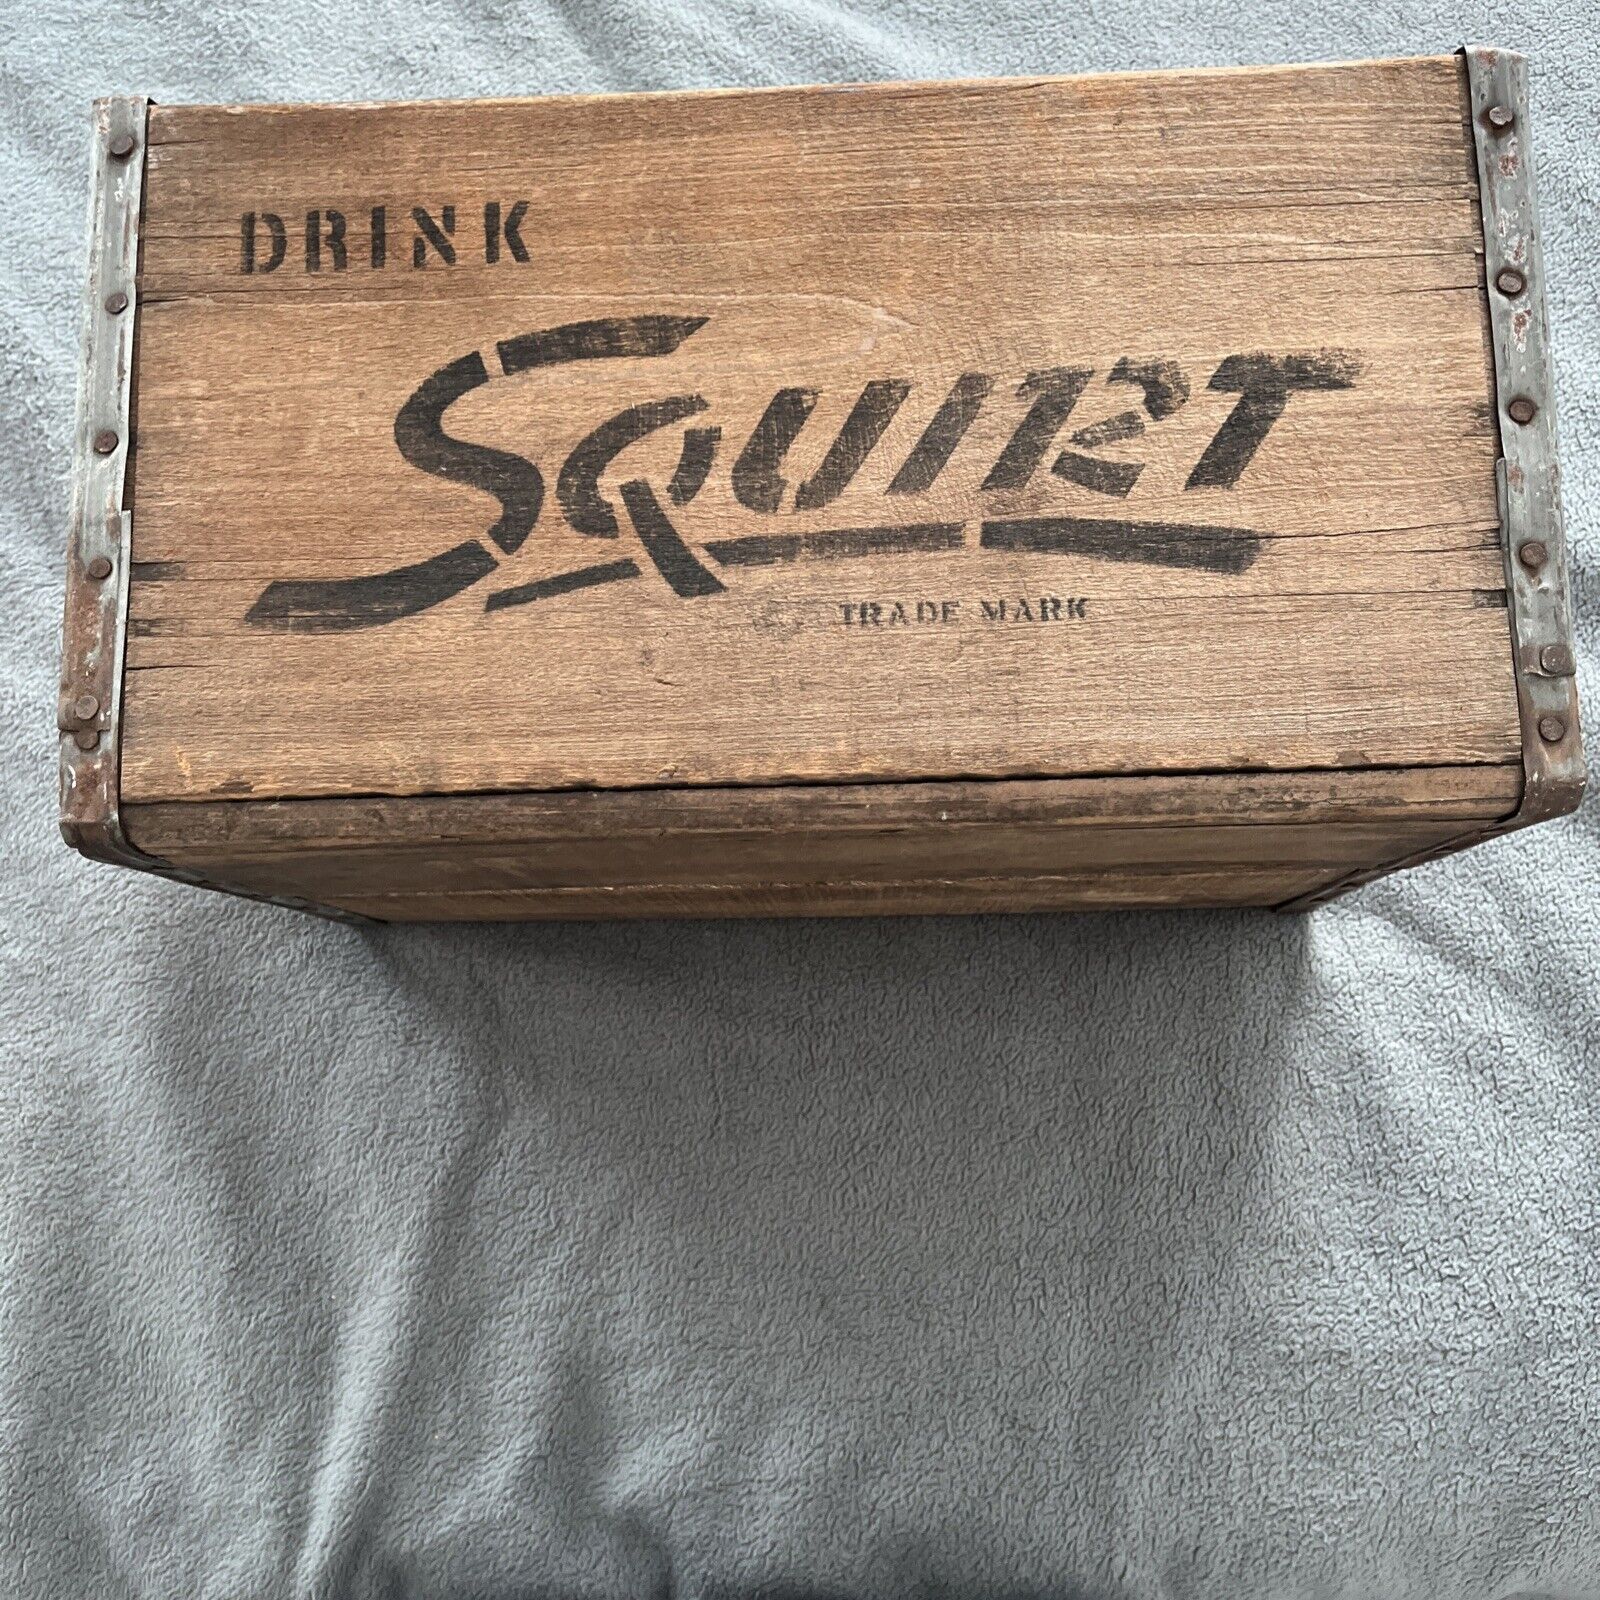 VINTAGE SQUIRT BOTTLING CO. JOHNSTOWN, PA. WOODEN CRATE